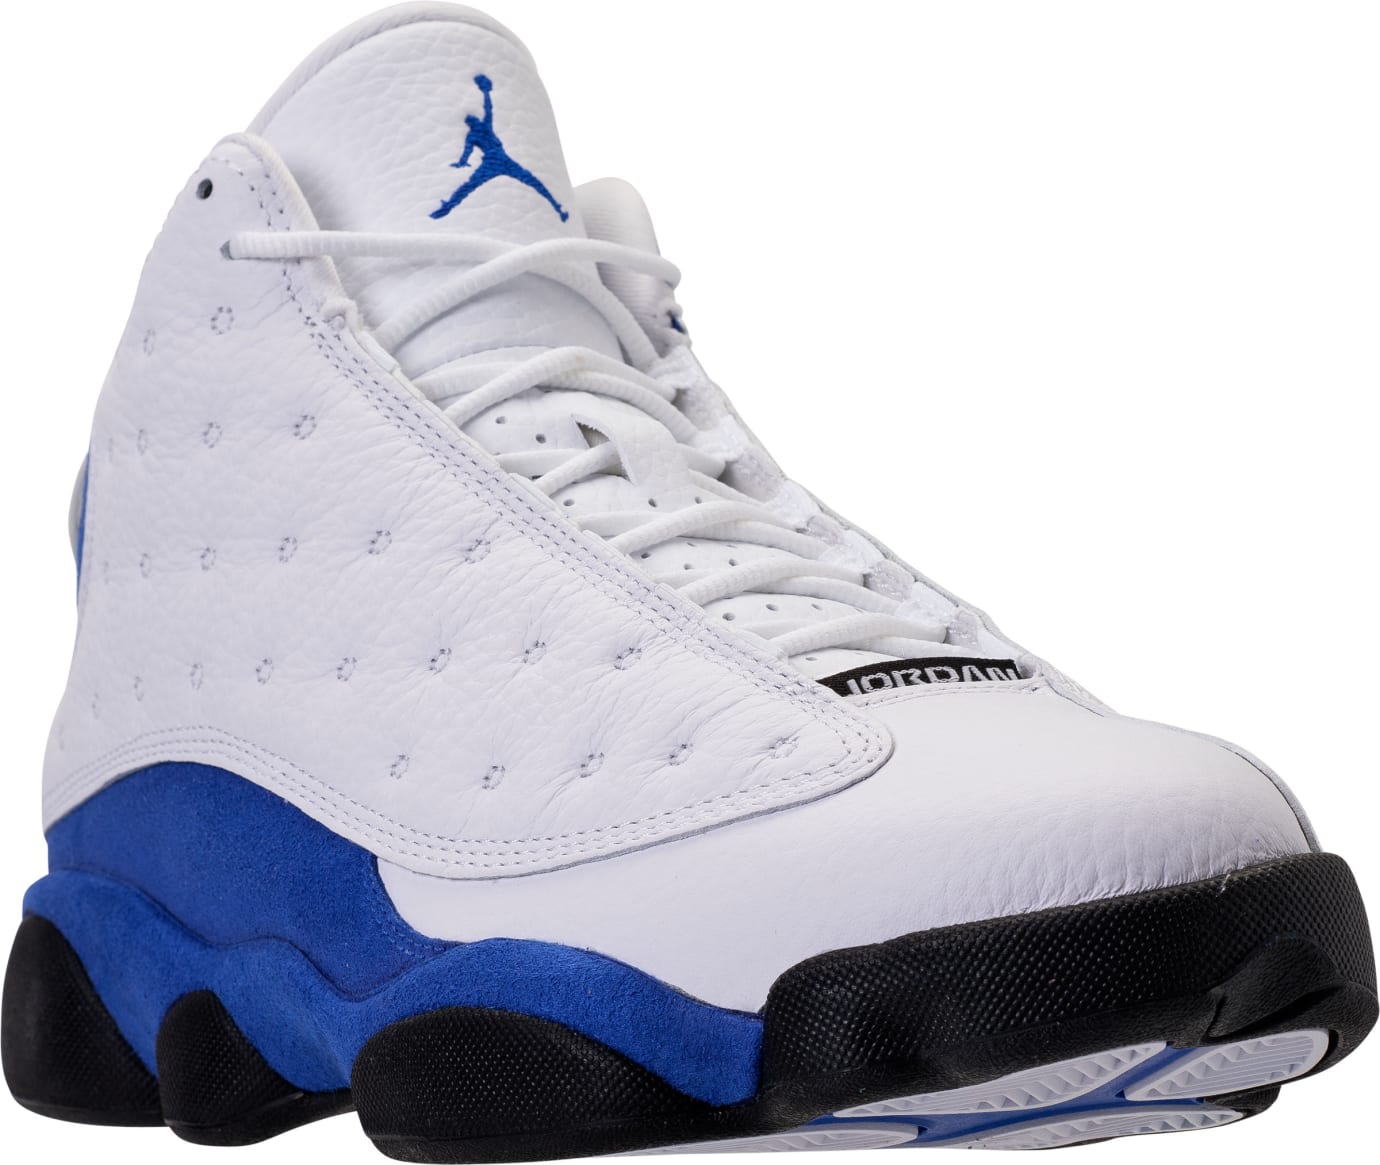 jordan 13 blue and white release date